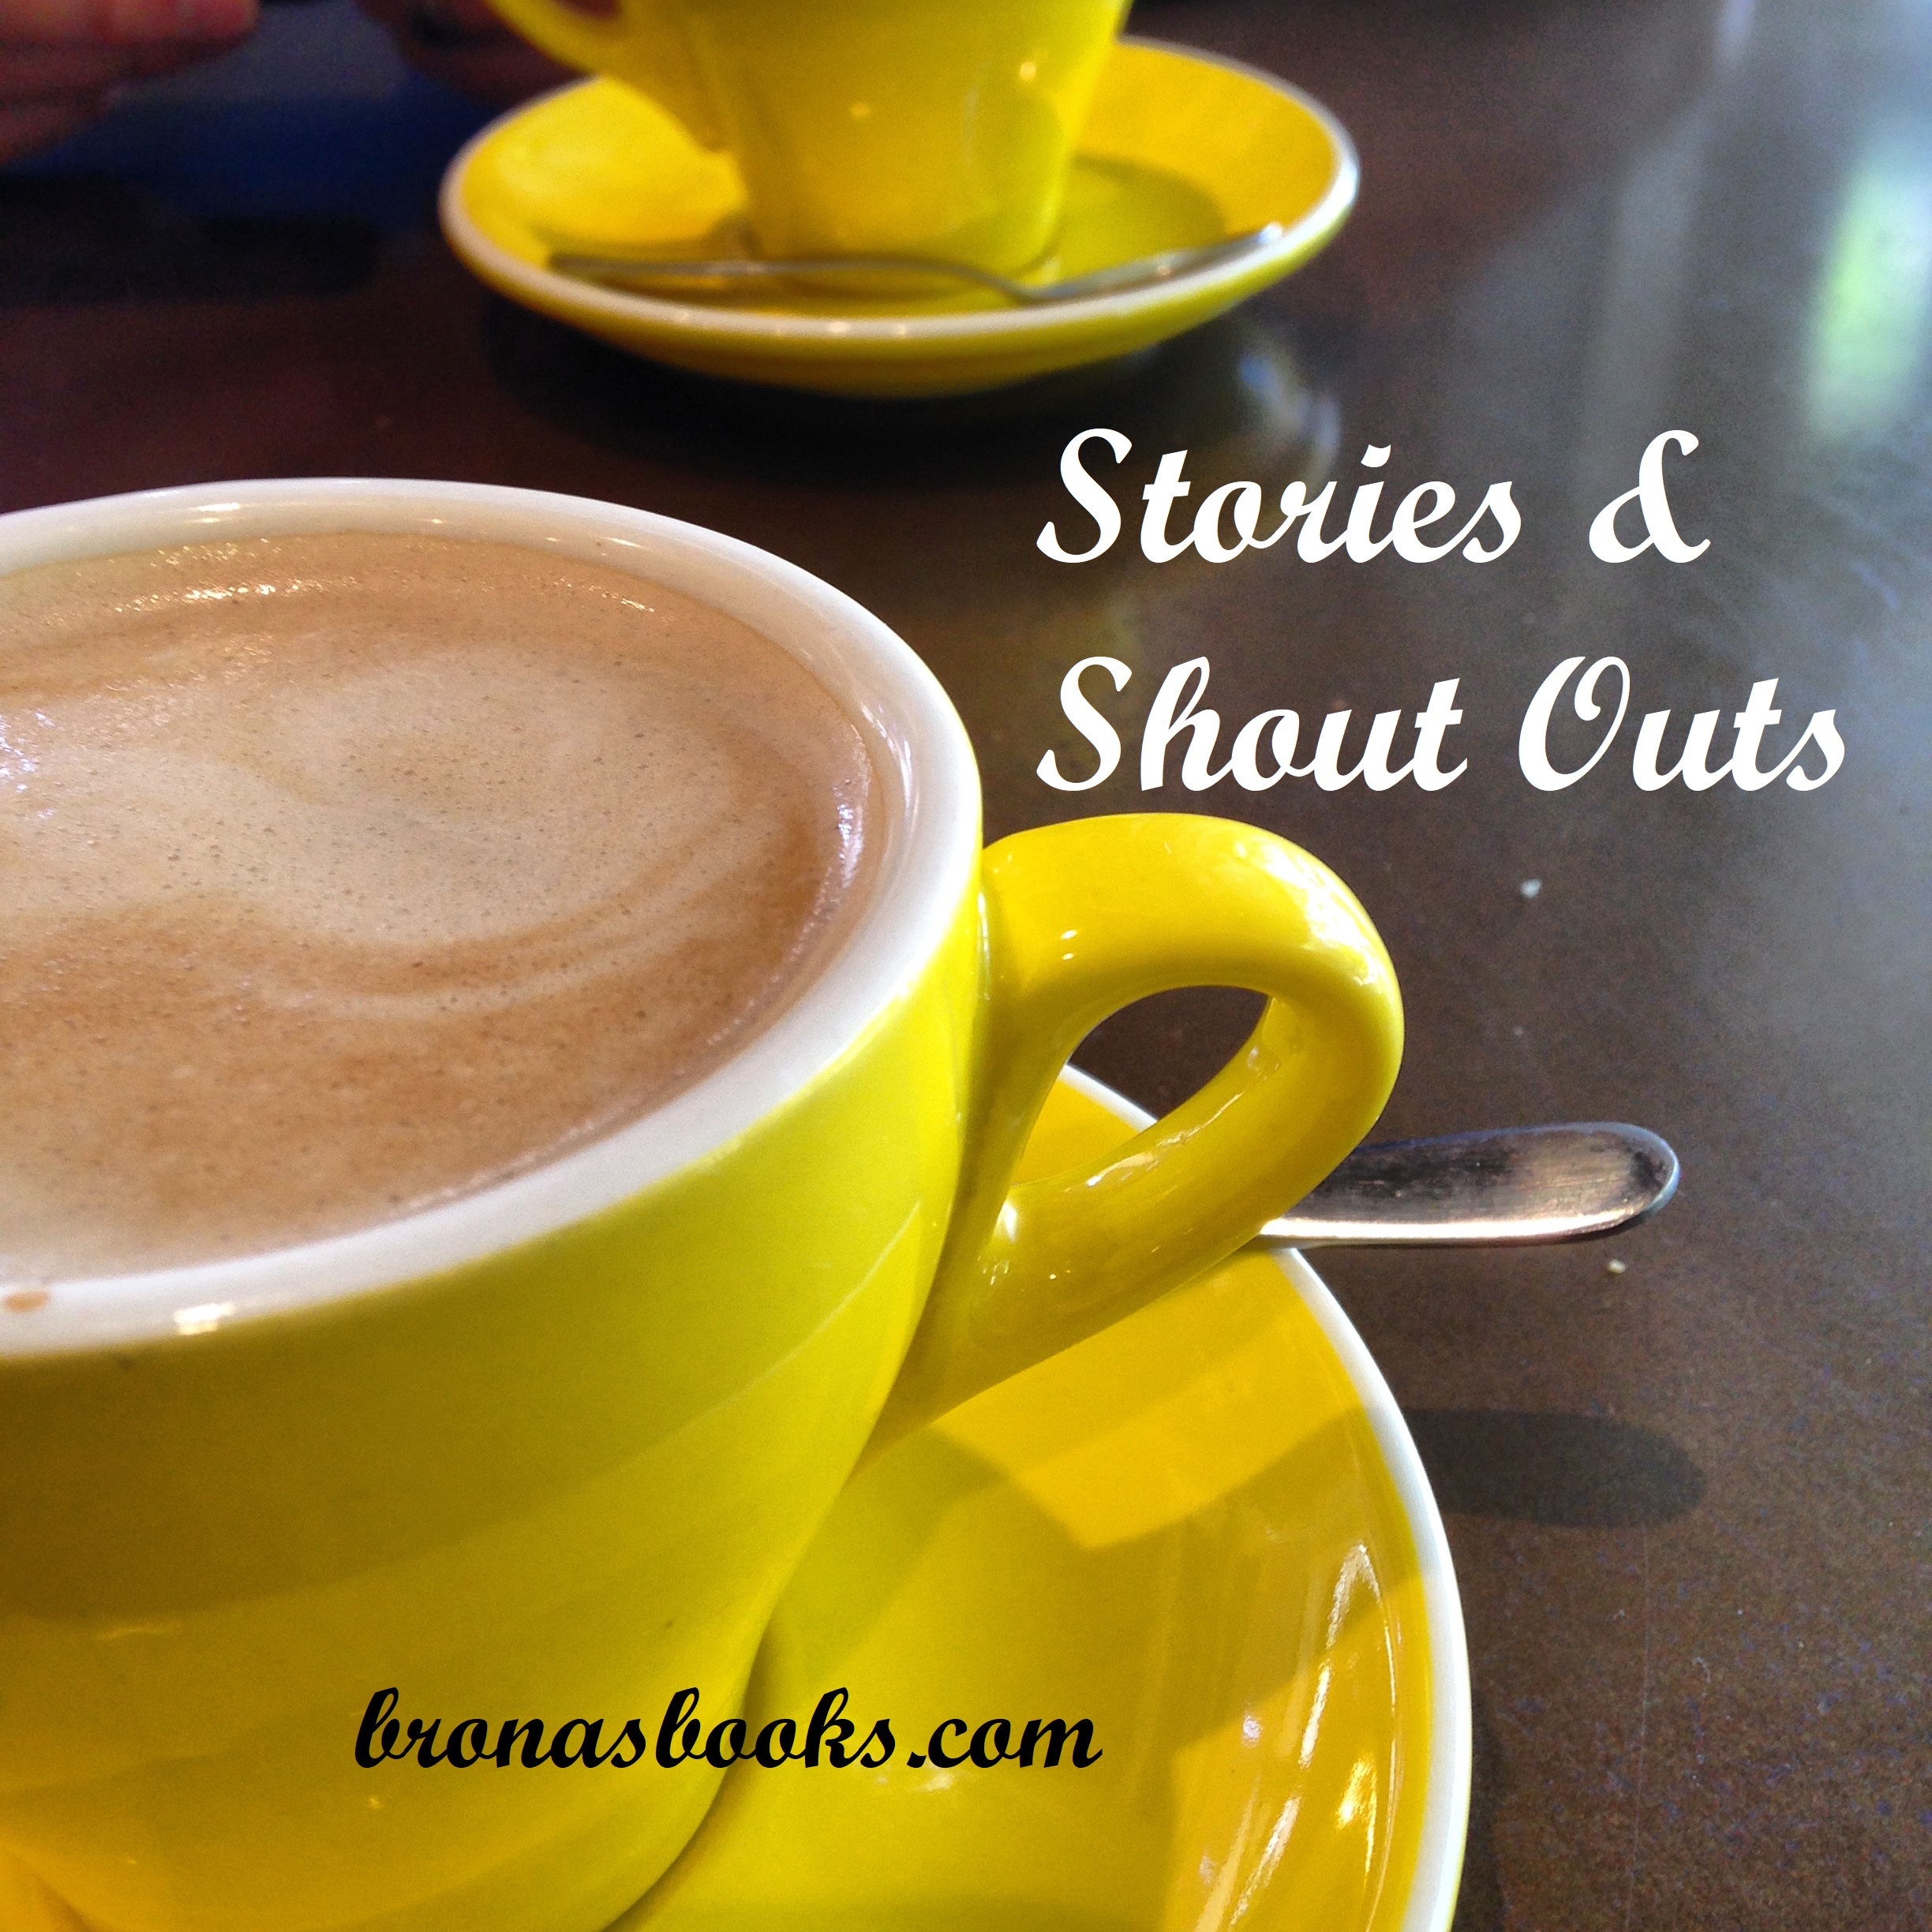 Stories & Shout Outs Badge